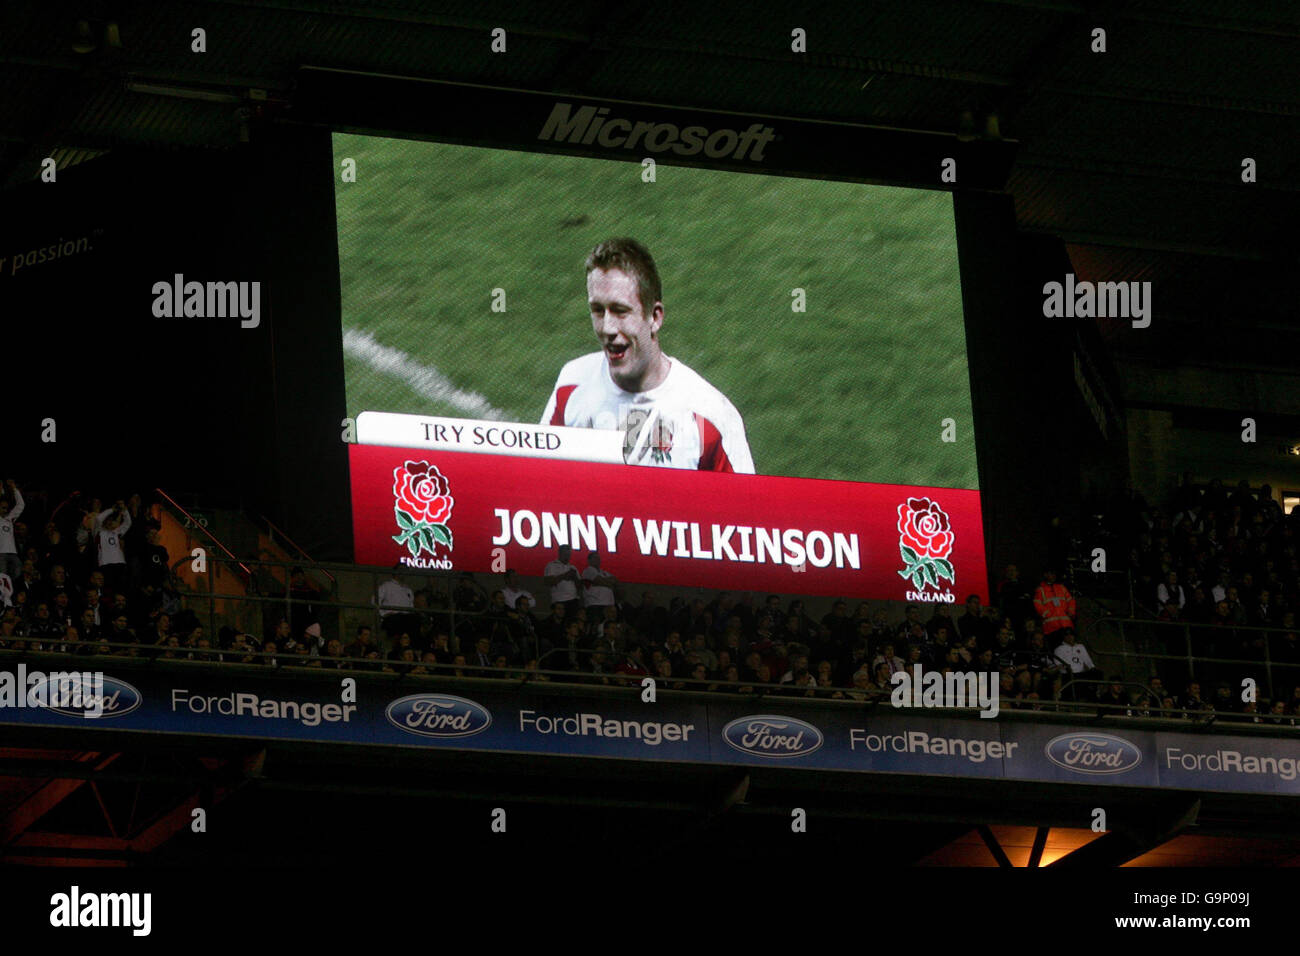 England's Jonny Wilkinson smiles after his try is awarded against Scotland on the large screen during the RBS 6 Nations match at Twickenham, London. Stock Photo